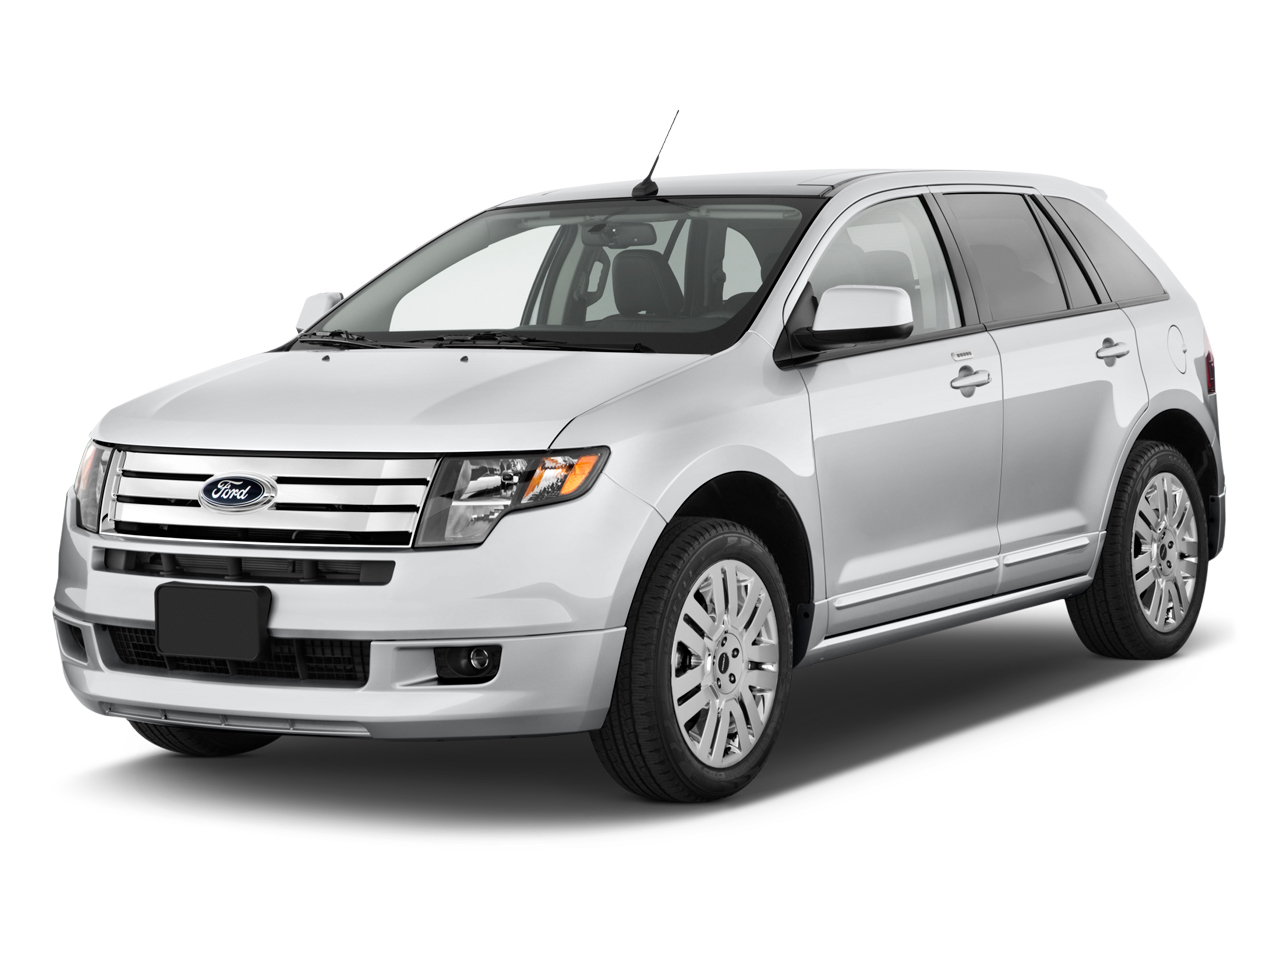 2011 Ford Edge Review Ratings Specs Prices And Photos